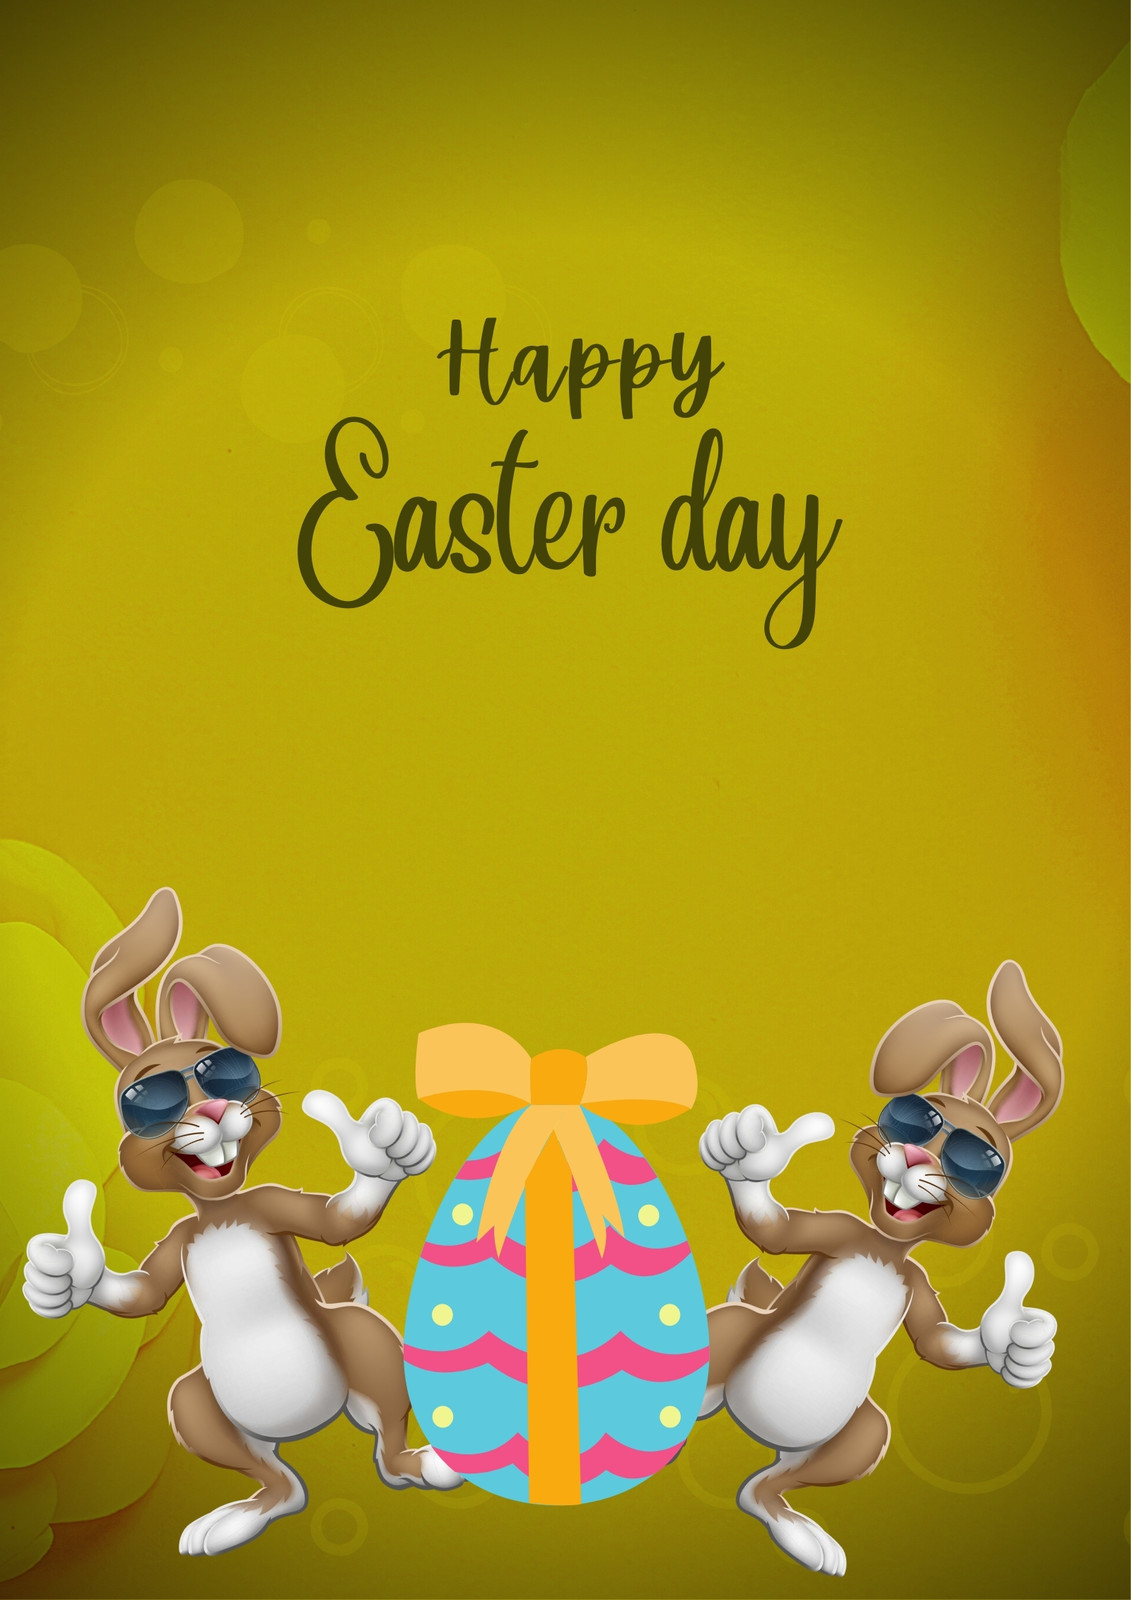 Page 17 - Free customizable, printable Easter poster templates | Canva